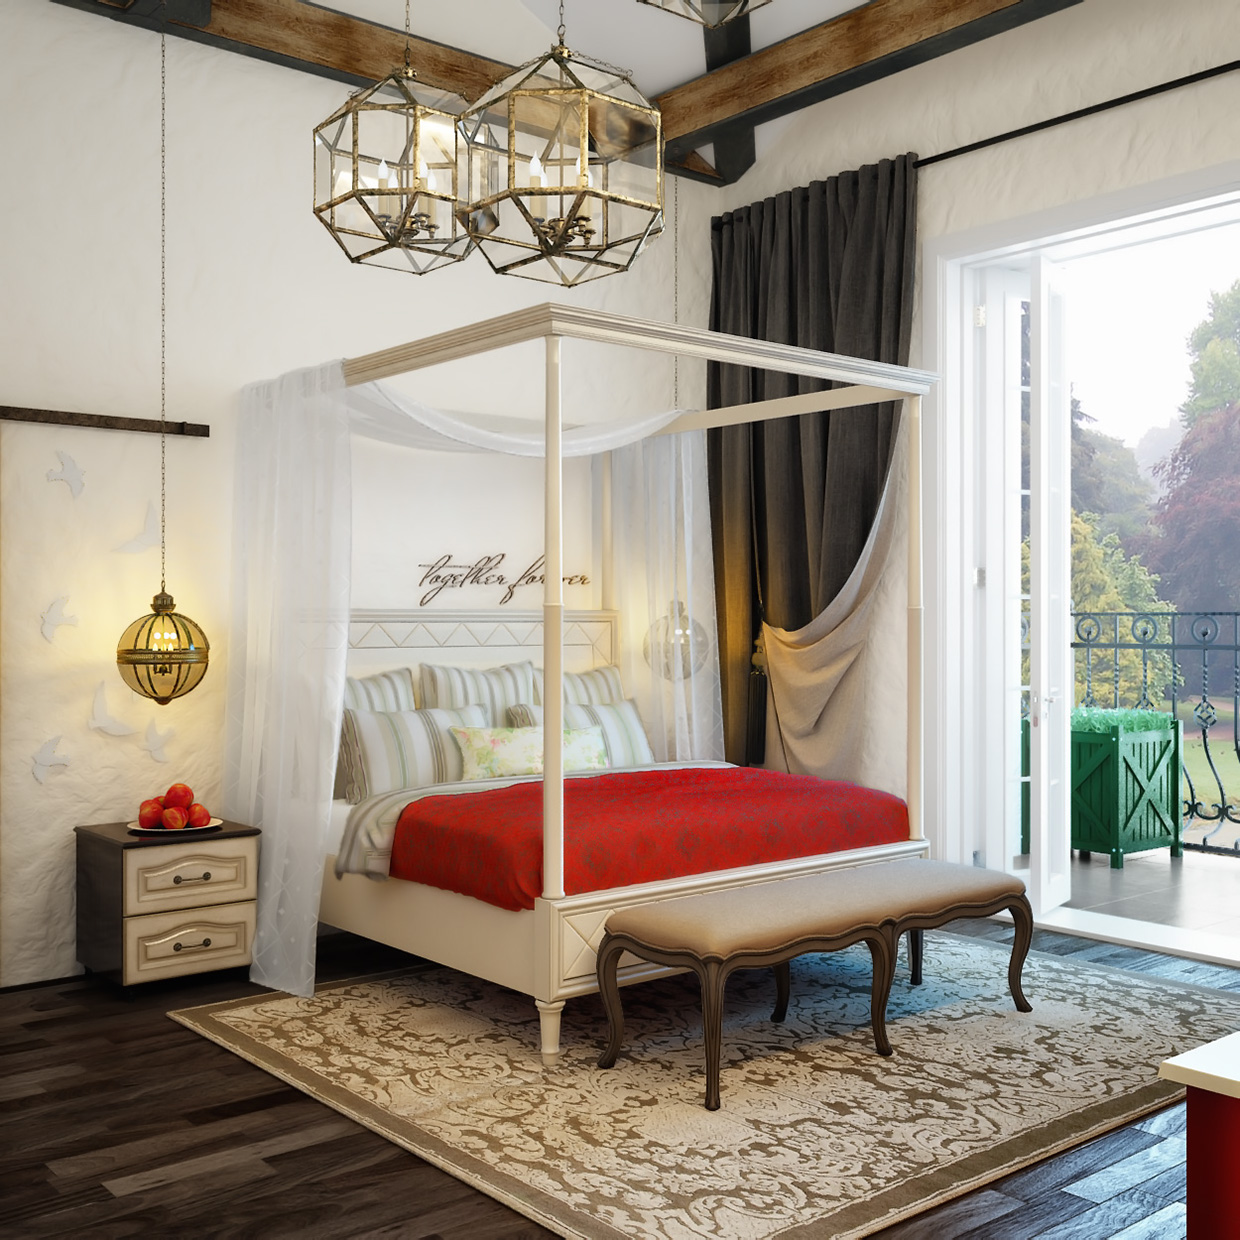 Luxury bedroom design "width =" 1240 "height =" 1240 "srcset =" https://mileray.com/wp-content/uploads/2020/05/1588509332_817_40-Bedroom-Designs-Include-With-Furniture-Placement-and-Decorating-Ideas.jpg 1240w, https://mileray.com/ wp-content / uploads / 2016/08 / Olga-Podgornaja5-150x150.jpg 150w, https://mileray.com/wp-content/uploads/2016/08/Olga-Podgornaja5-300x300.jpg 300w, https: // mileray.com/wp-content/uploads/2016/08/Olga-Podgornaja5-768x768.jpg 768w, https://mileray.com/wp-content/uploads/2016/08/Olga-Podgornaja5-1024x1024.jpg 1024w, https://mileray.com/wp-content/uploads/2016/08/Olga-Podgornaja5-696x696.jpg 696w, https://mileray.com/wp-content/uploads/2016/08/Olga-Podgornaja5-1068x1068 .jpg 1068w, https://mileray.com/wp-content/uploads/2016/08/Olga-Podgornaja5-420x420.jpg 420w "Sizes =" (maximum width: 1240px) 100vw, 1240px